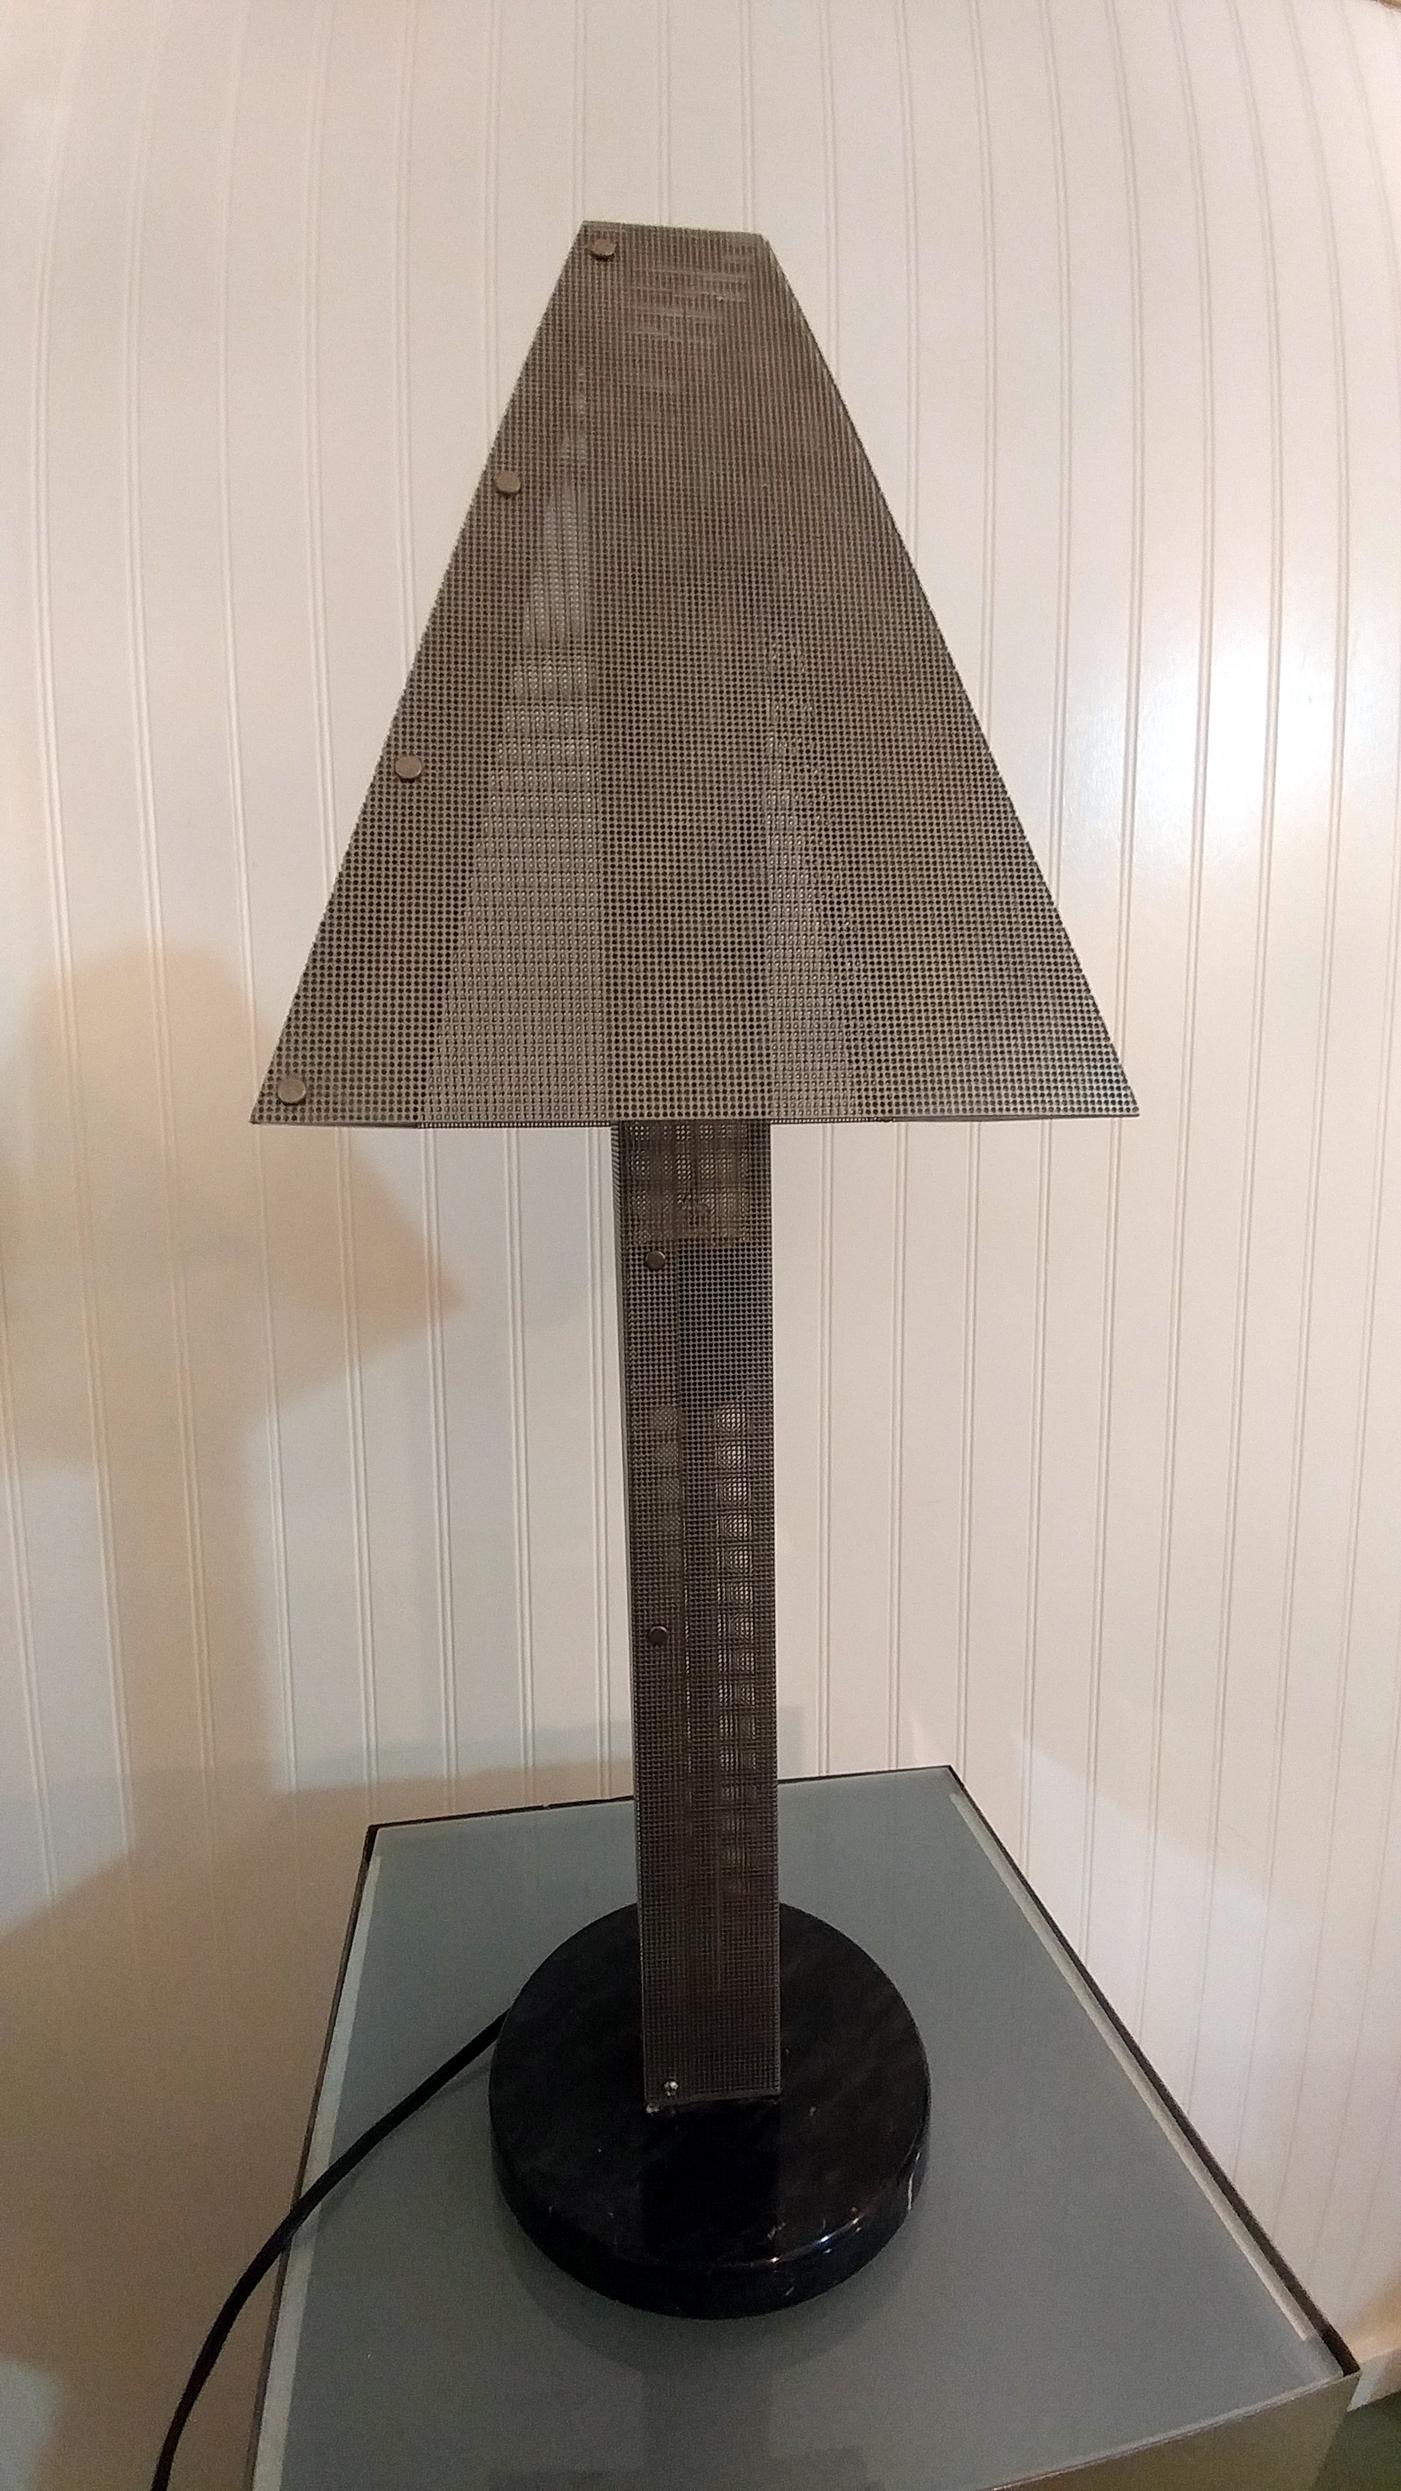 A great looking Postmodern sculptural table lamp by Wendy Stevens, offered by La Porte. This lamp is the taller version and is in exceptional condition. The shade and body crafted entirely in matte silver wire mesh on marble base. Illuminated as